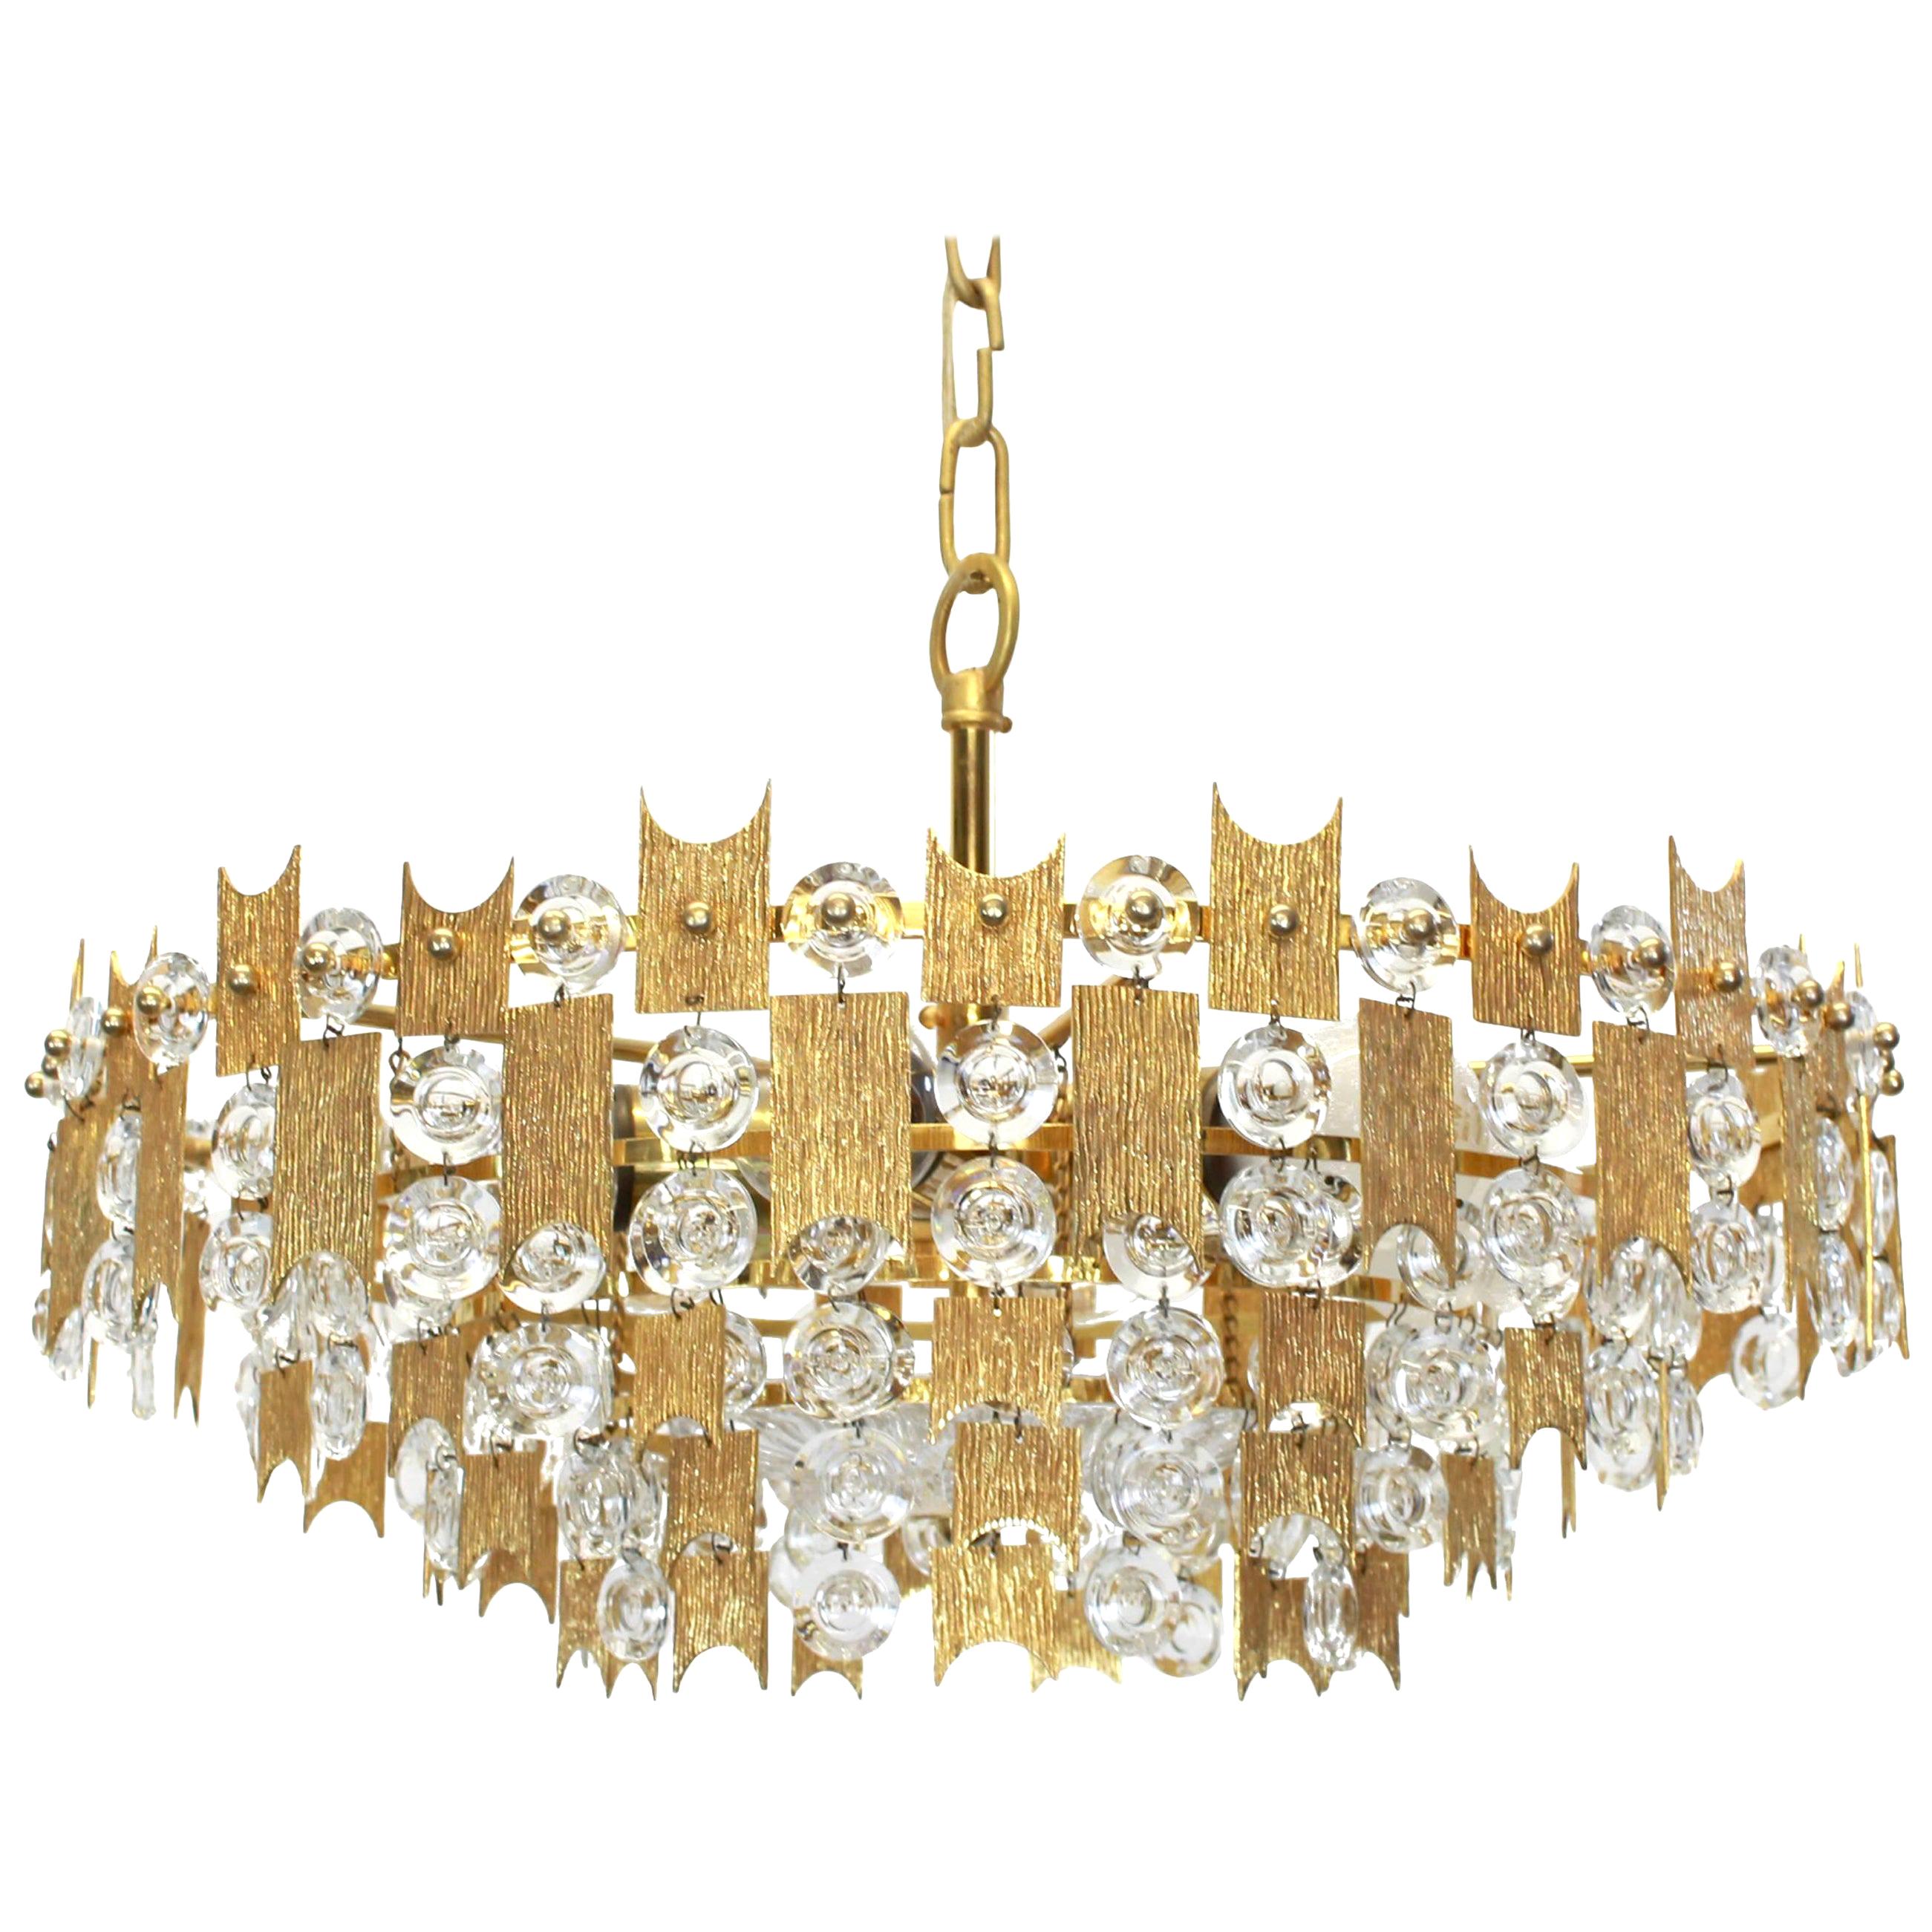 Impressive Large Gilt Brass and Crystal Glass Chandelier by Palwa Germany, 1960s